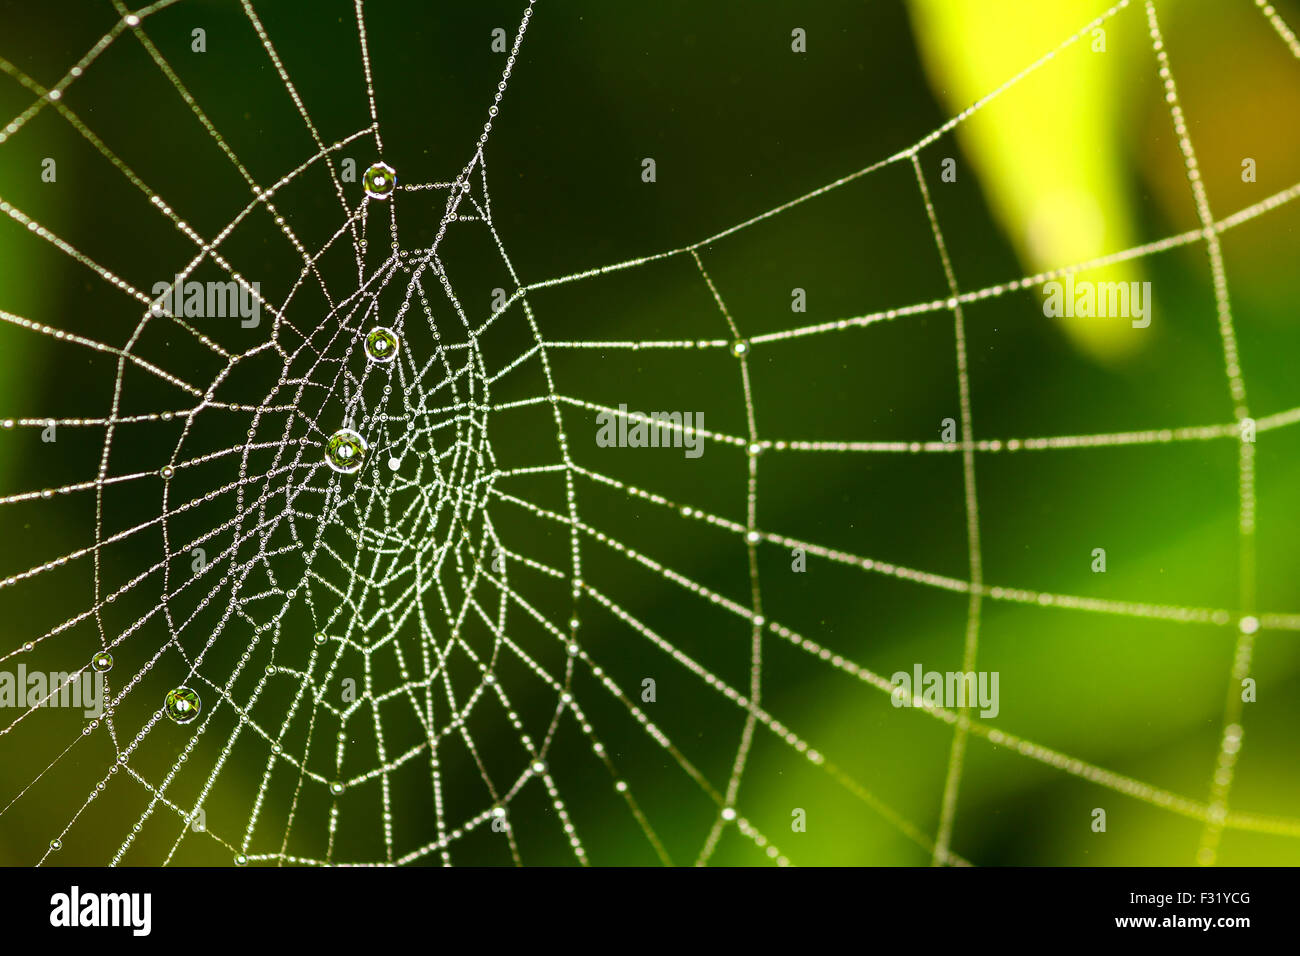 Leeds, UK. 28th Sep, 2015. A very misty start to Monday morning in Leeds led to water drops forming on spider webs creating an almost jewel like appearance. Taken on the 28th September 2015 in Leeds, West Yorkshire. Credit:  Andrew Gardner/Alamy Live News Stock Photo